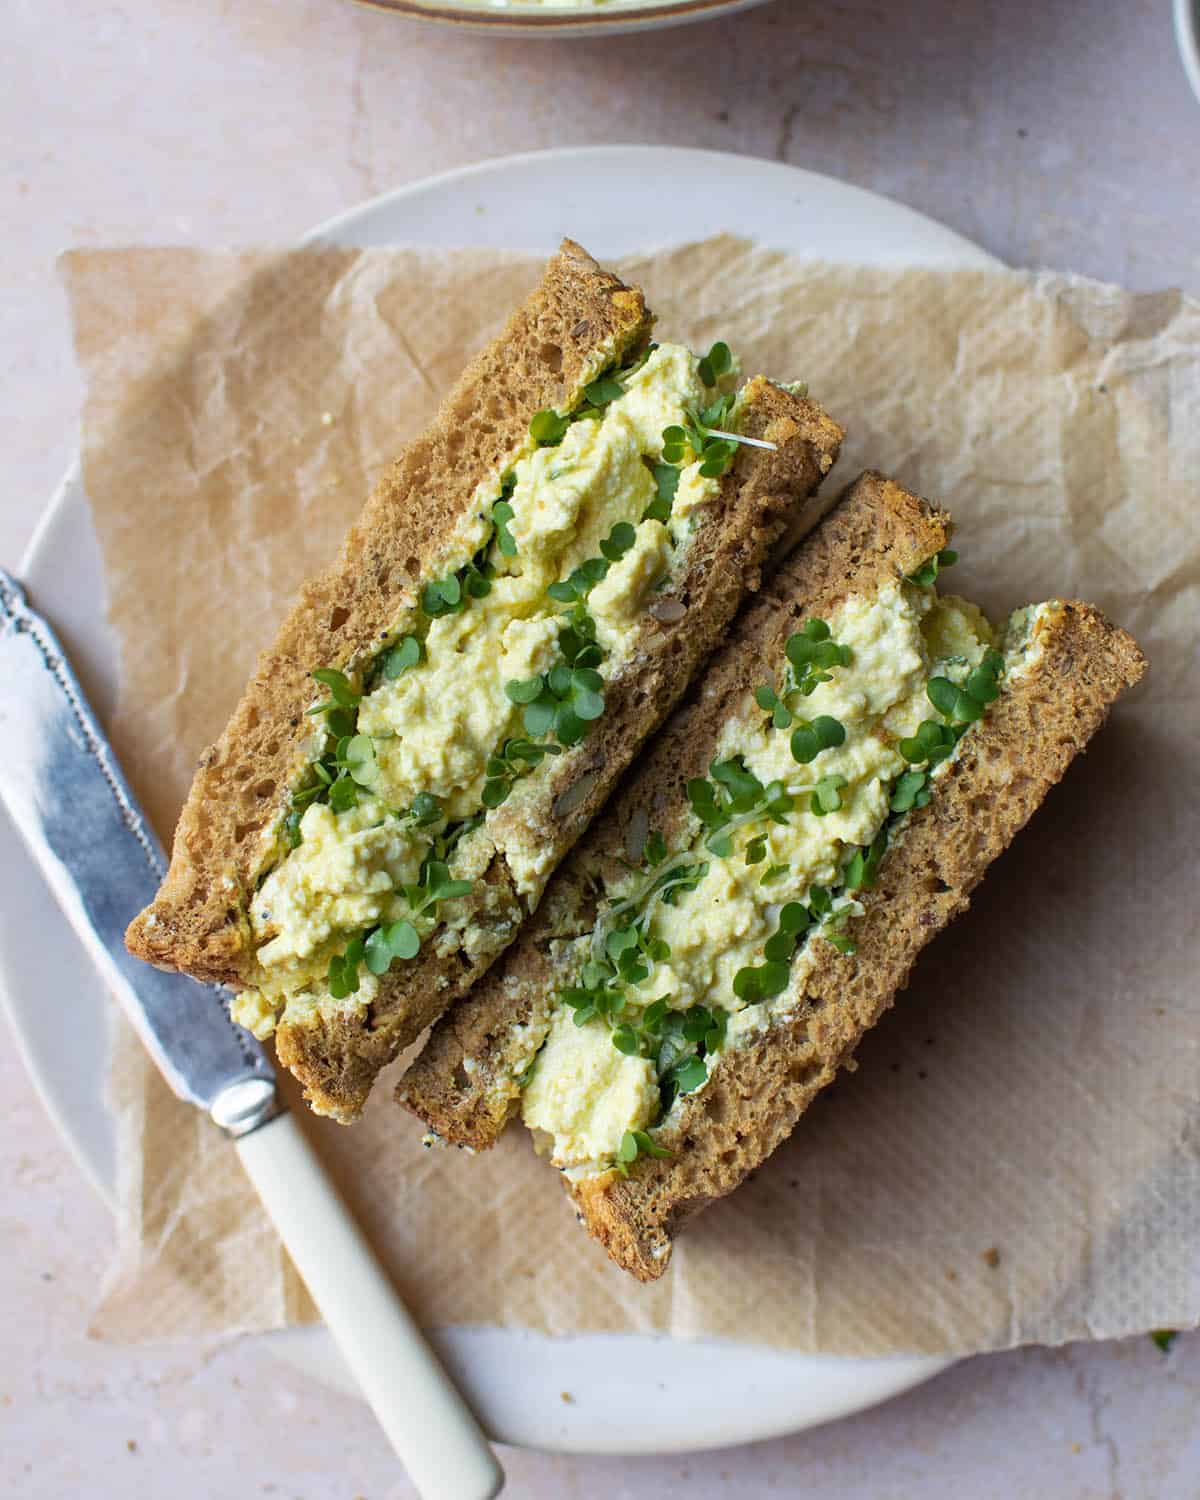 Top down view of vegan egg mayo sandwich on a plate with a knife